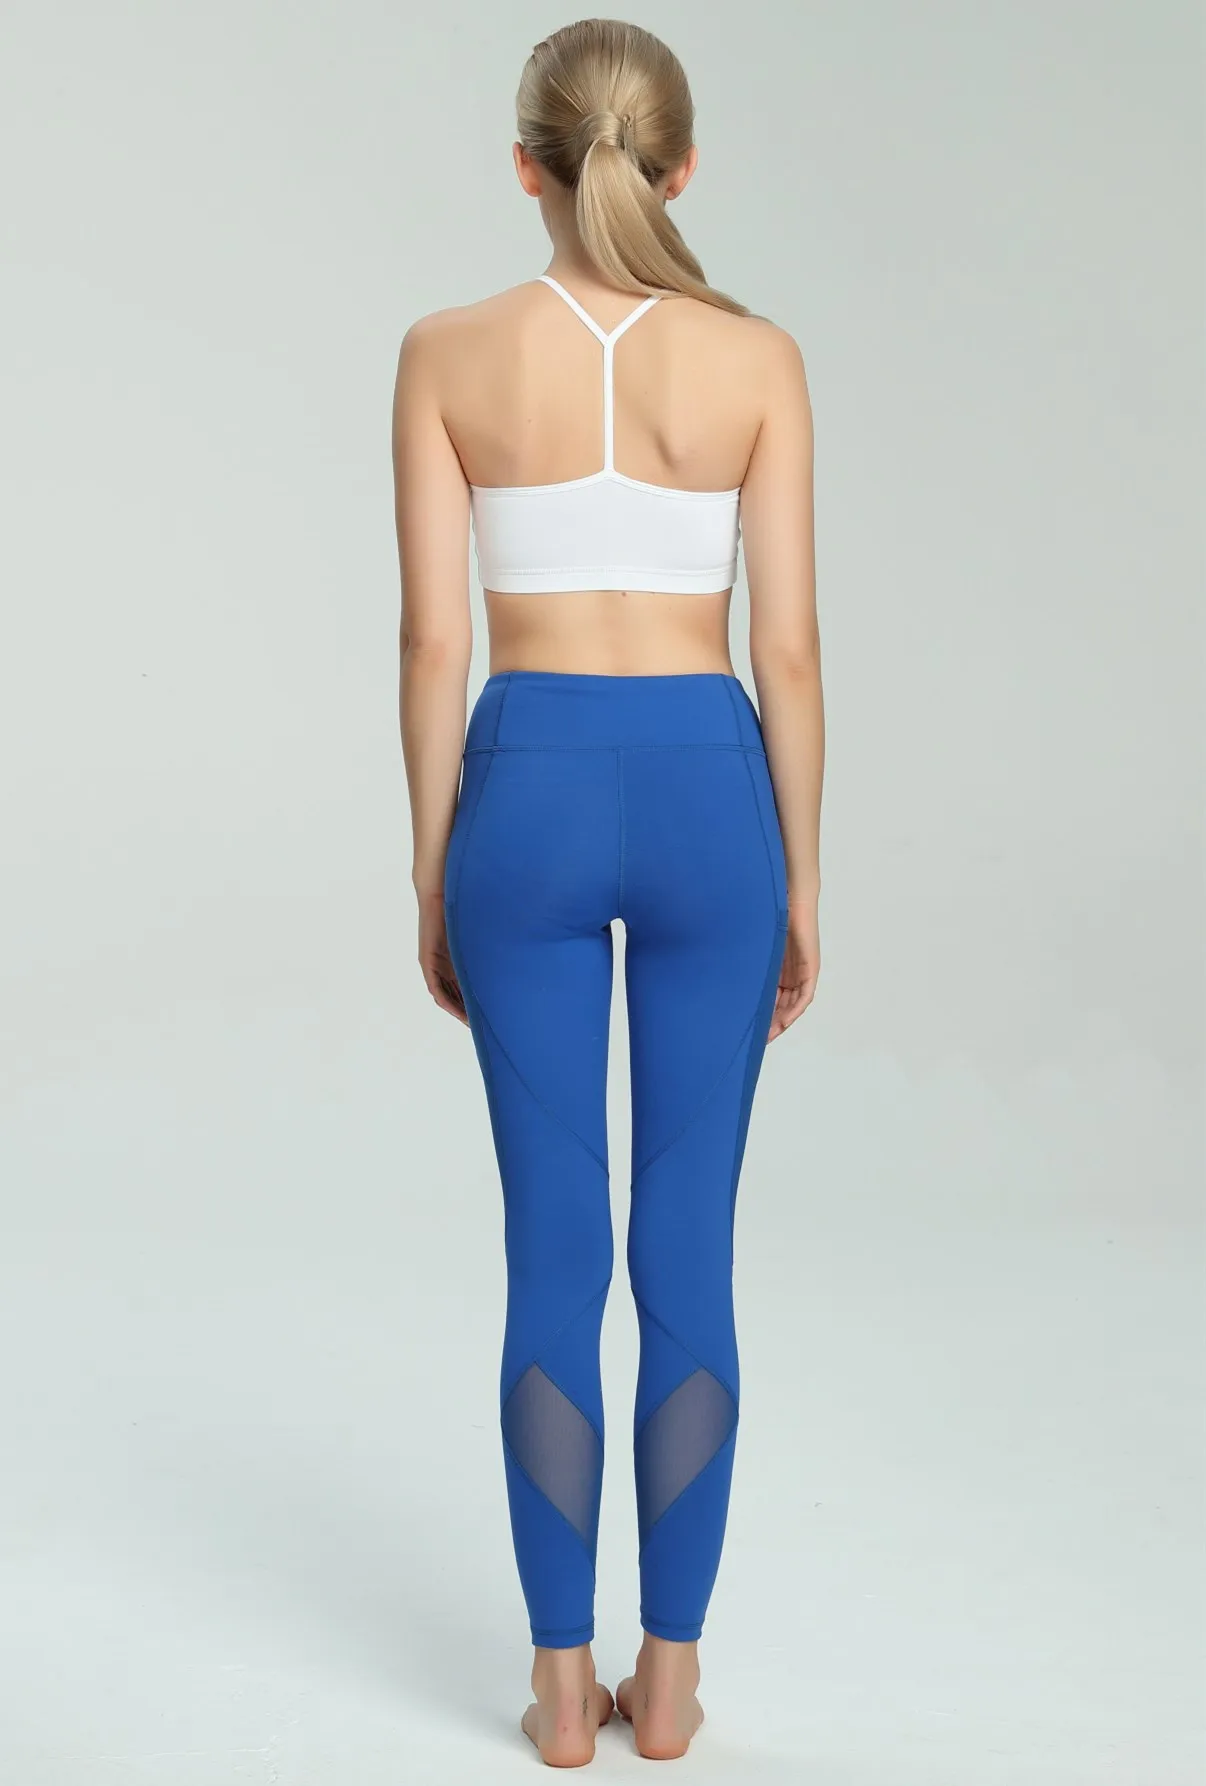 Wholesale Quality Yoga Sets at FITOP